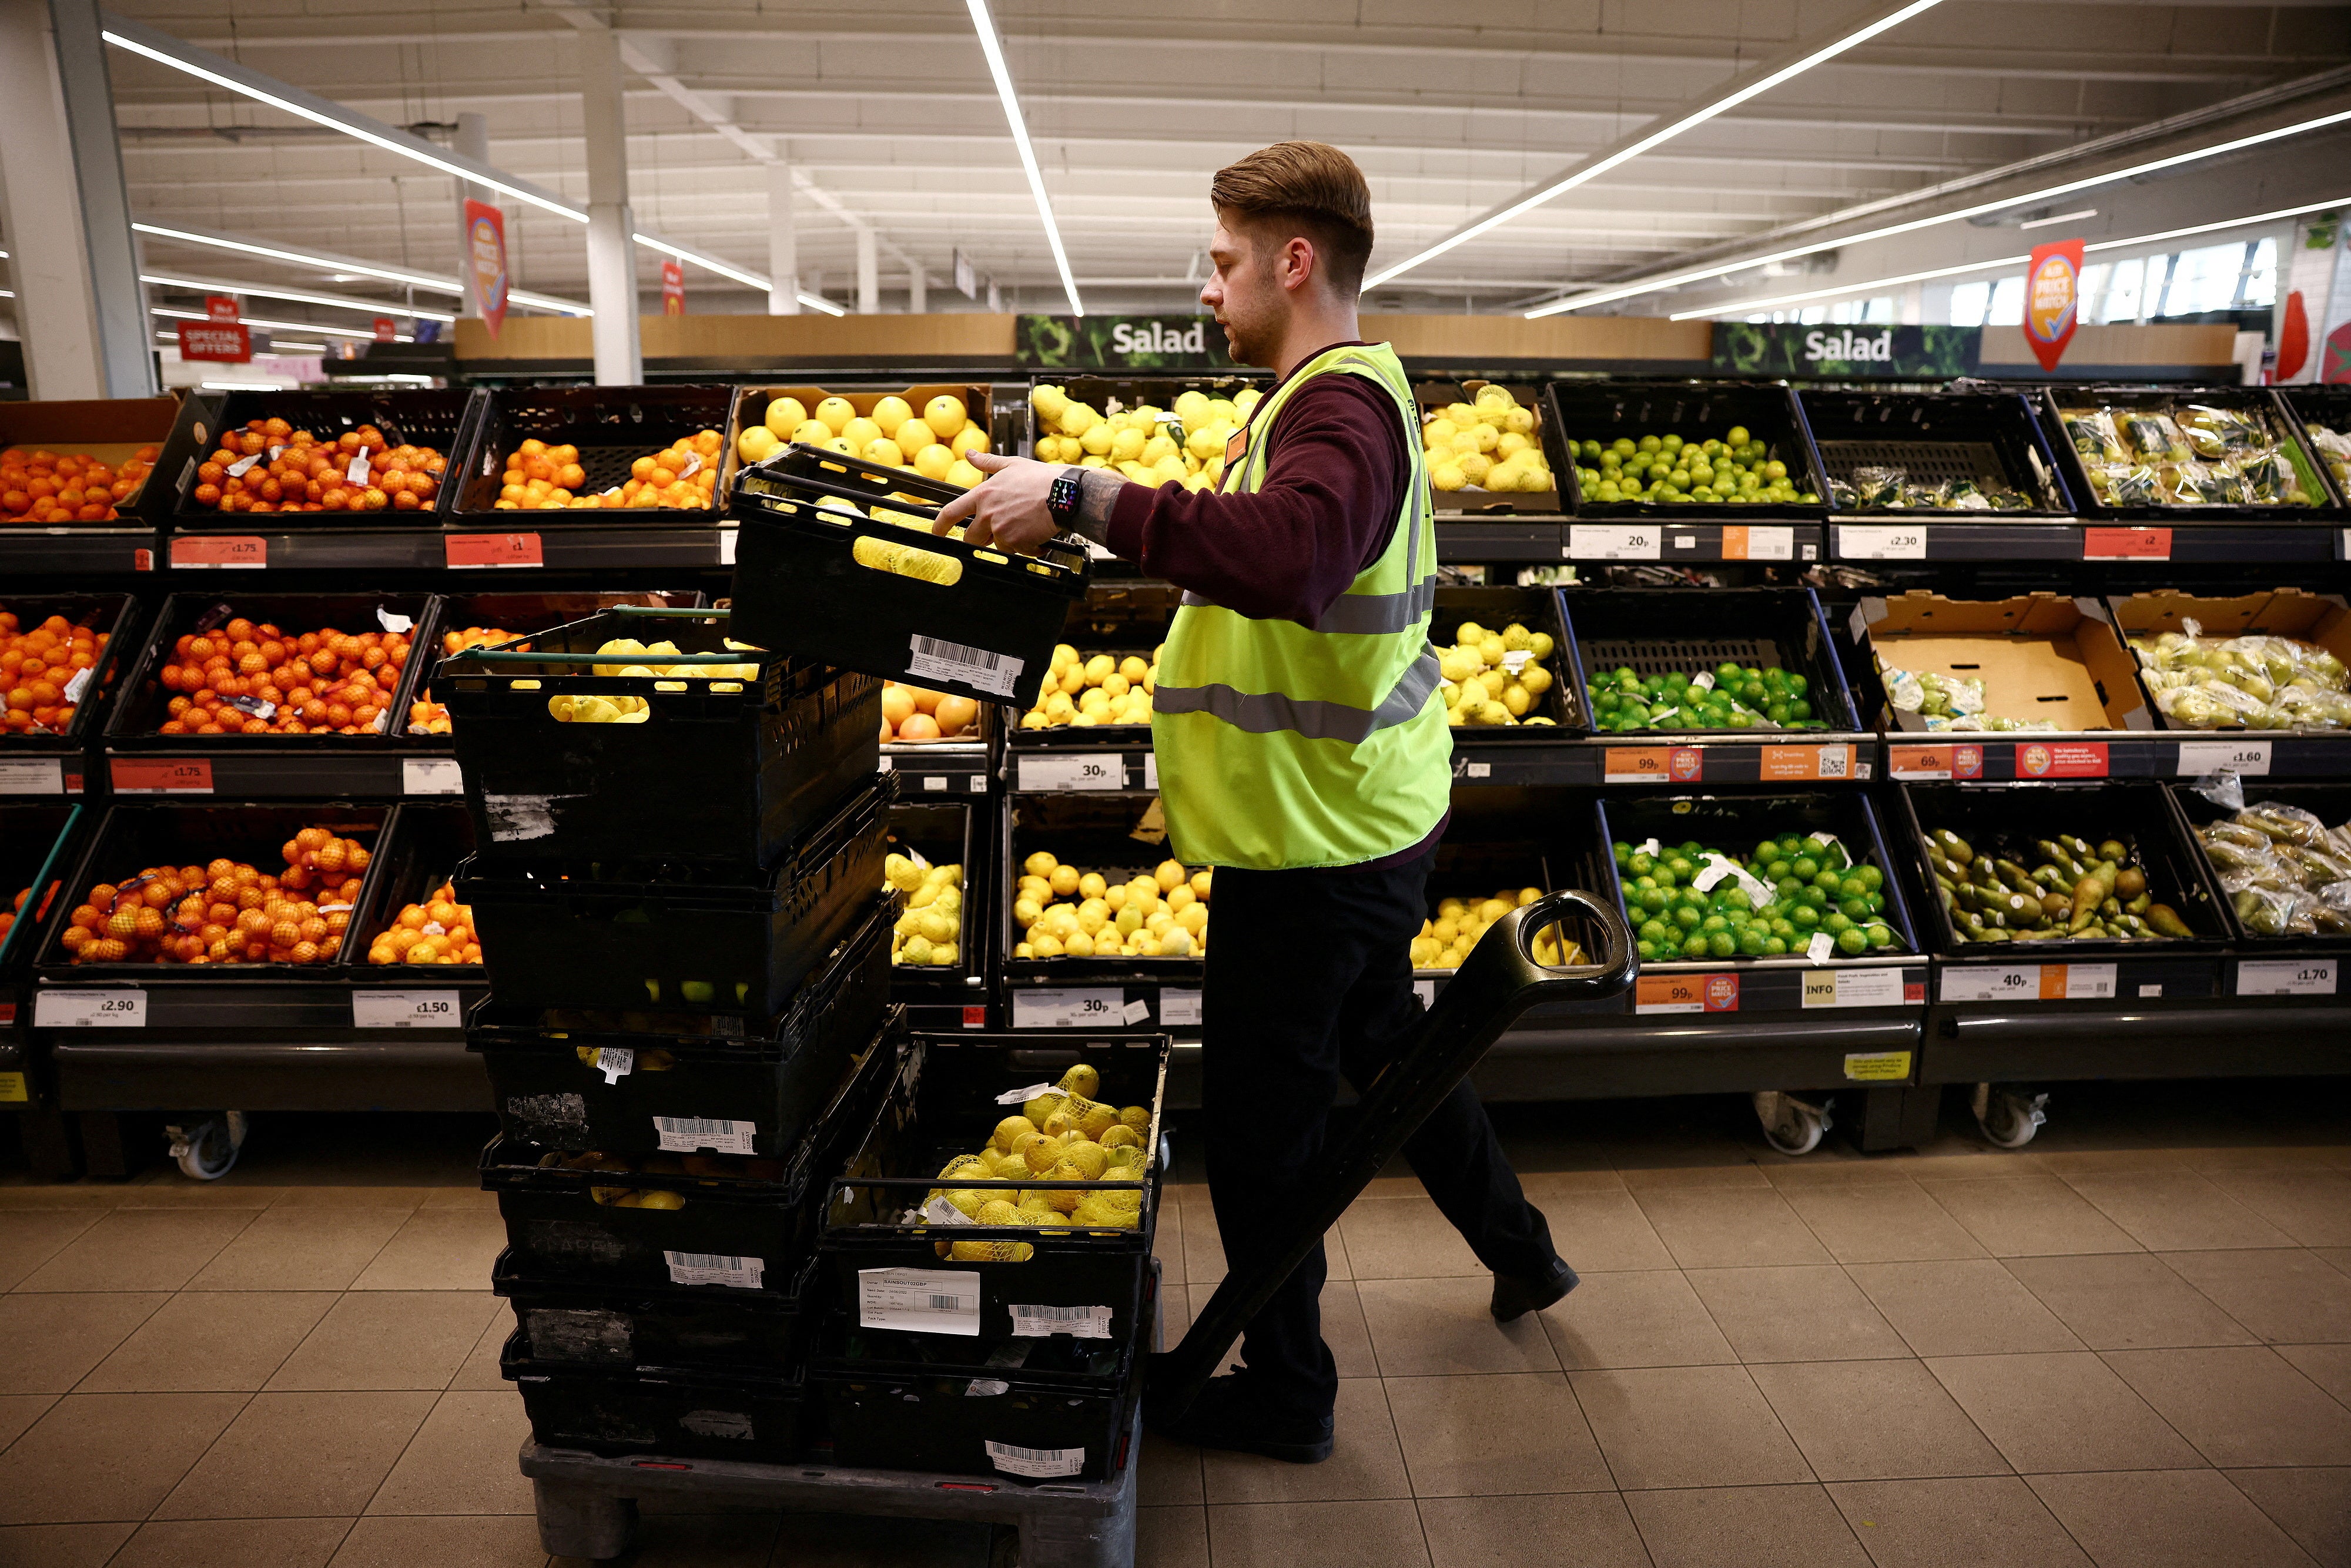 Sainsbury’s has said early Christmas shopping and customers watching the World Cup at home helped increase sales over the key festive quarter despite pressure on shoppers from the rising cost of living